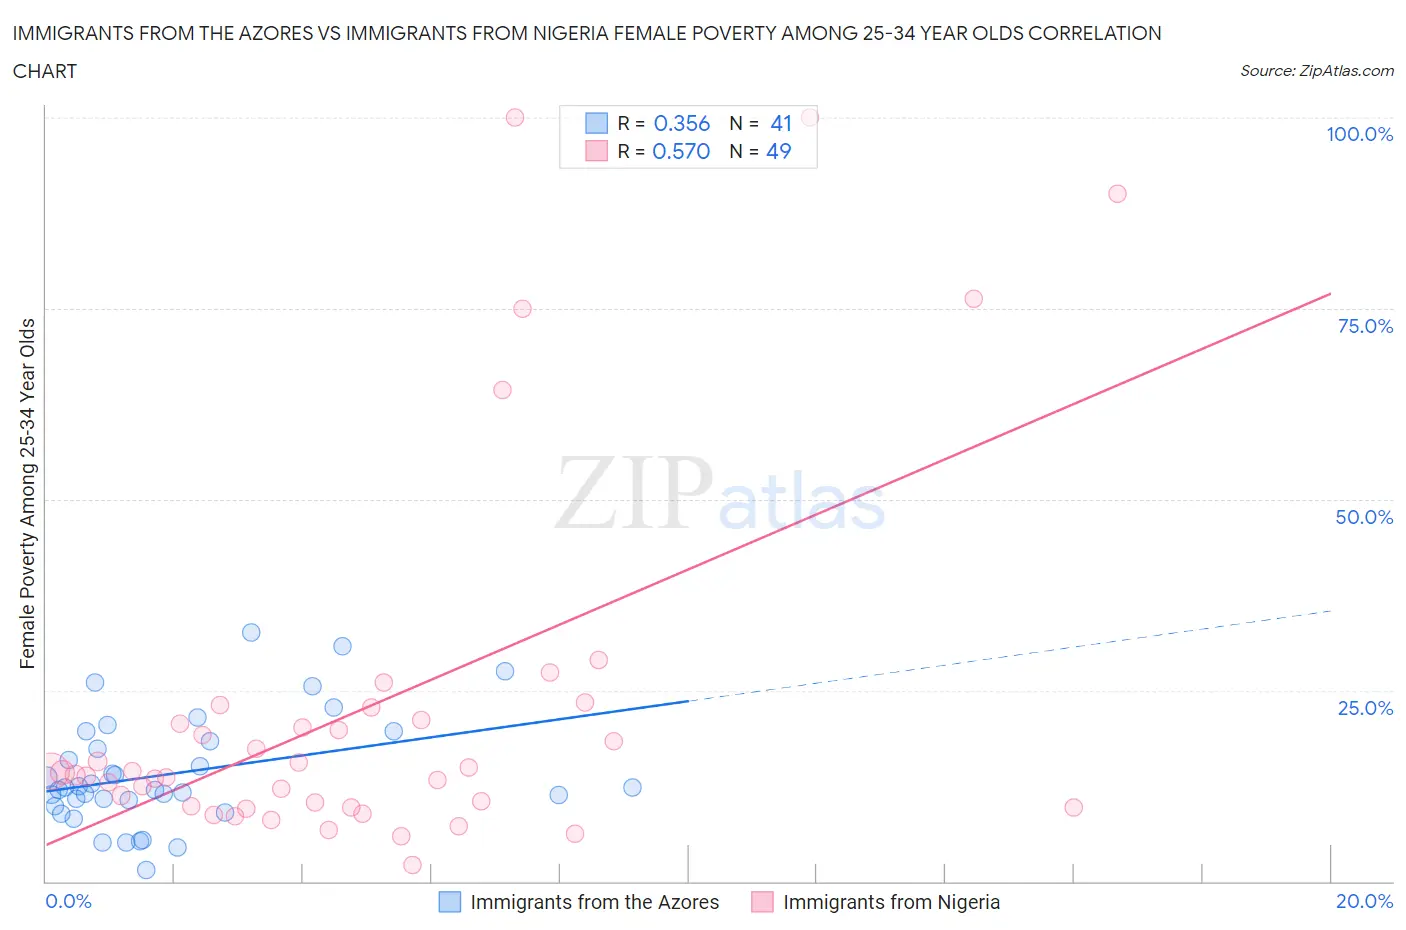 Immigrants from the Azores vs Immigrants from Nigeria Female Poverty Among 25-34 Year Olds